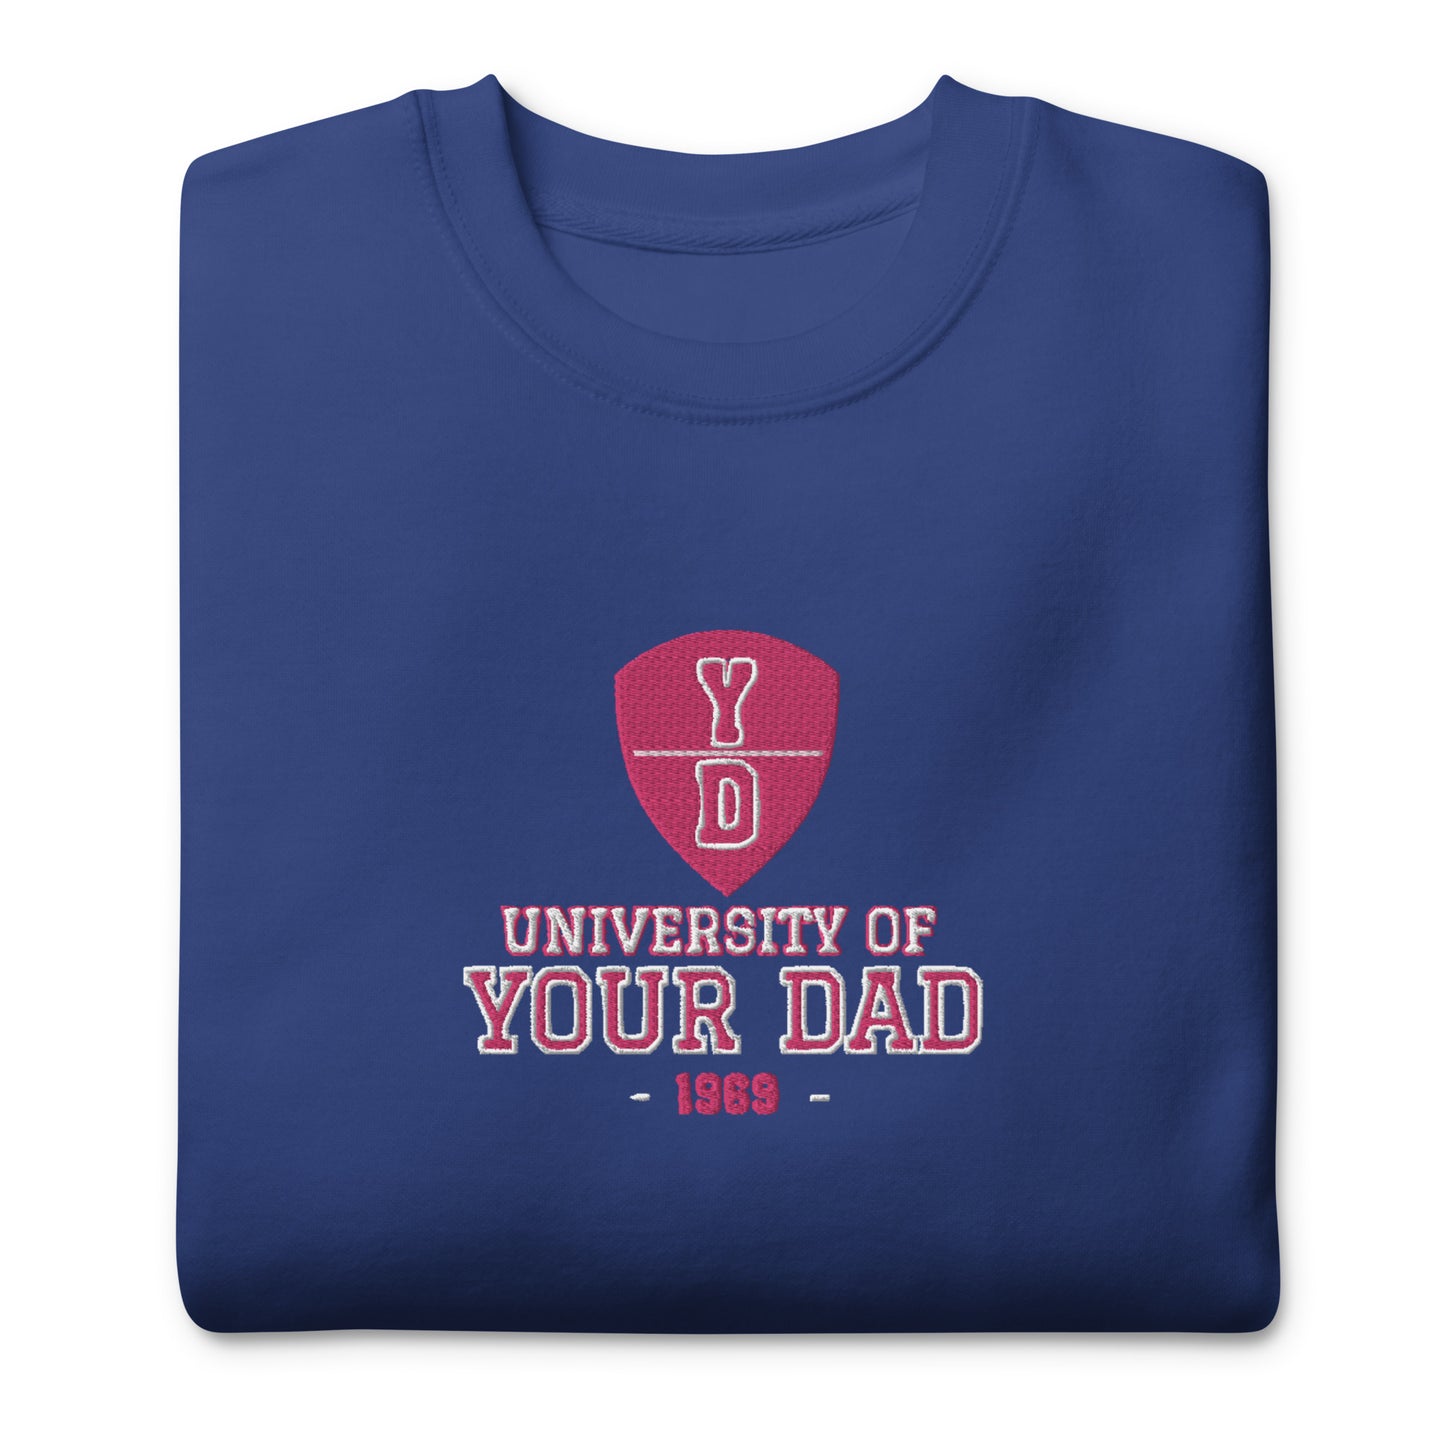 University of YOUR DAD Embroidered Crewneck